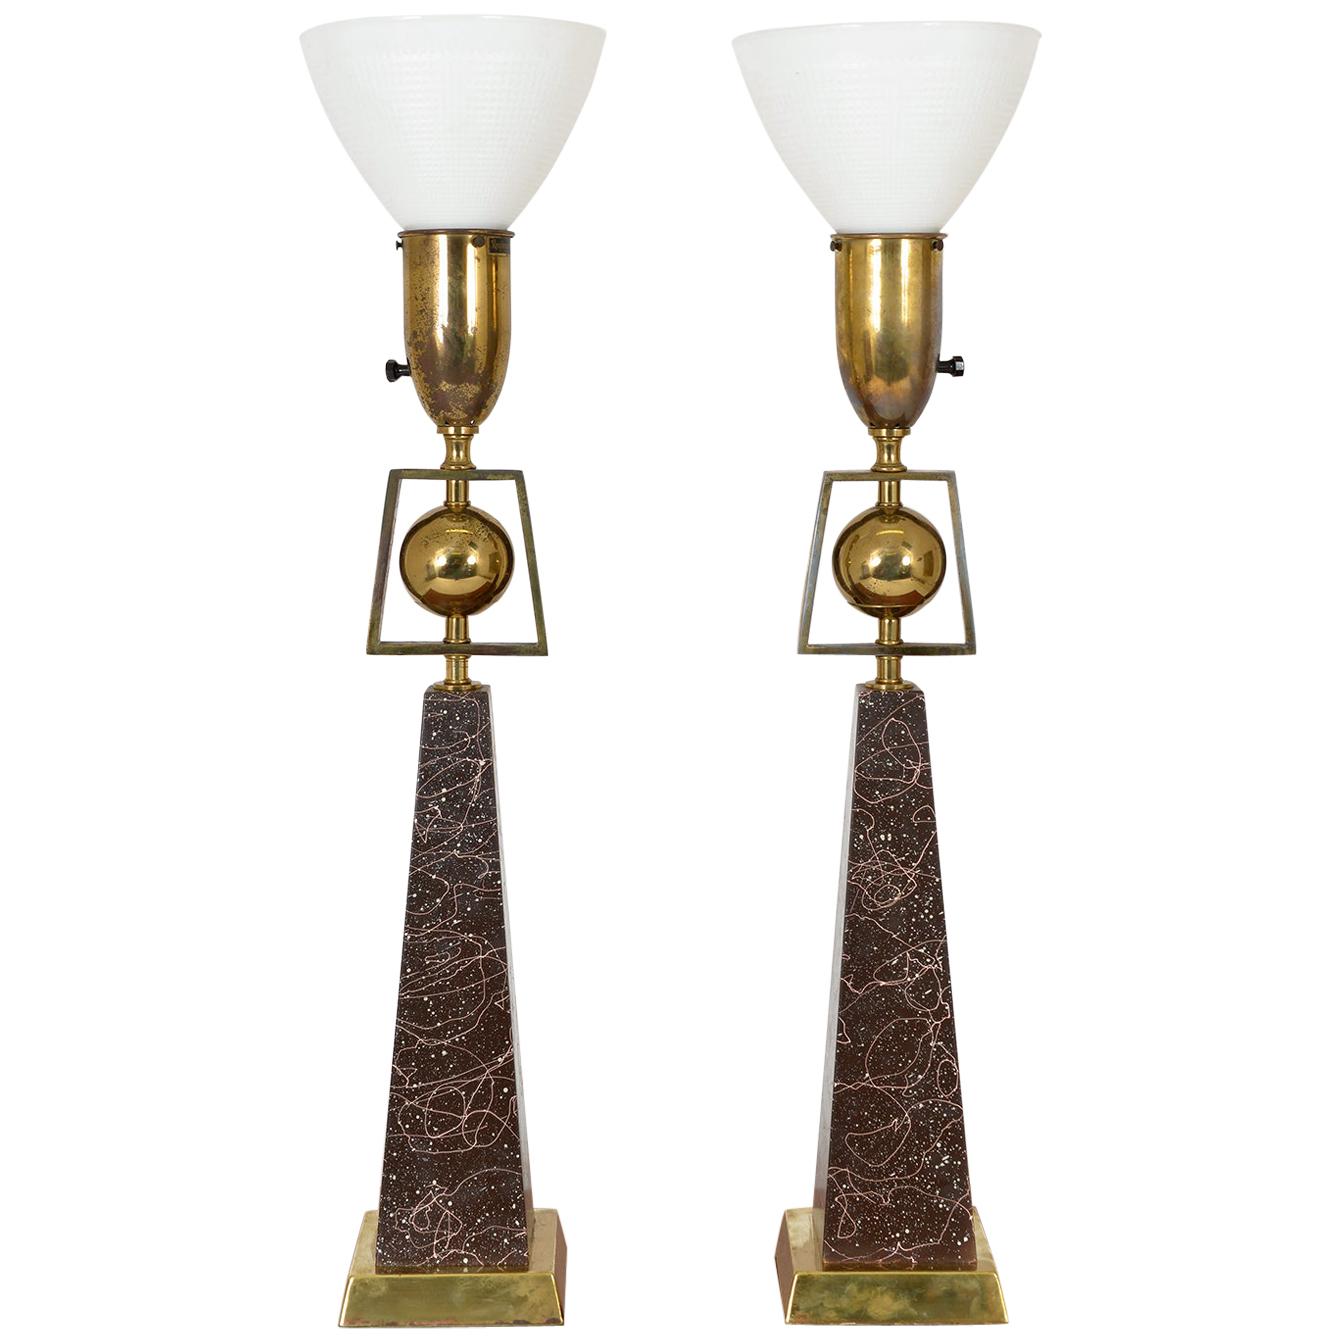 Pair of American Mid-Century Modern Obelisk Table Lamps by Rembrandt Lighting